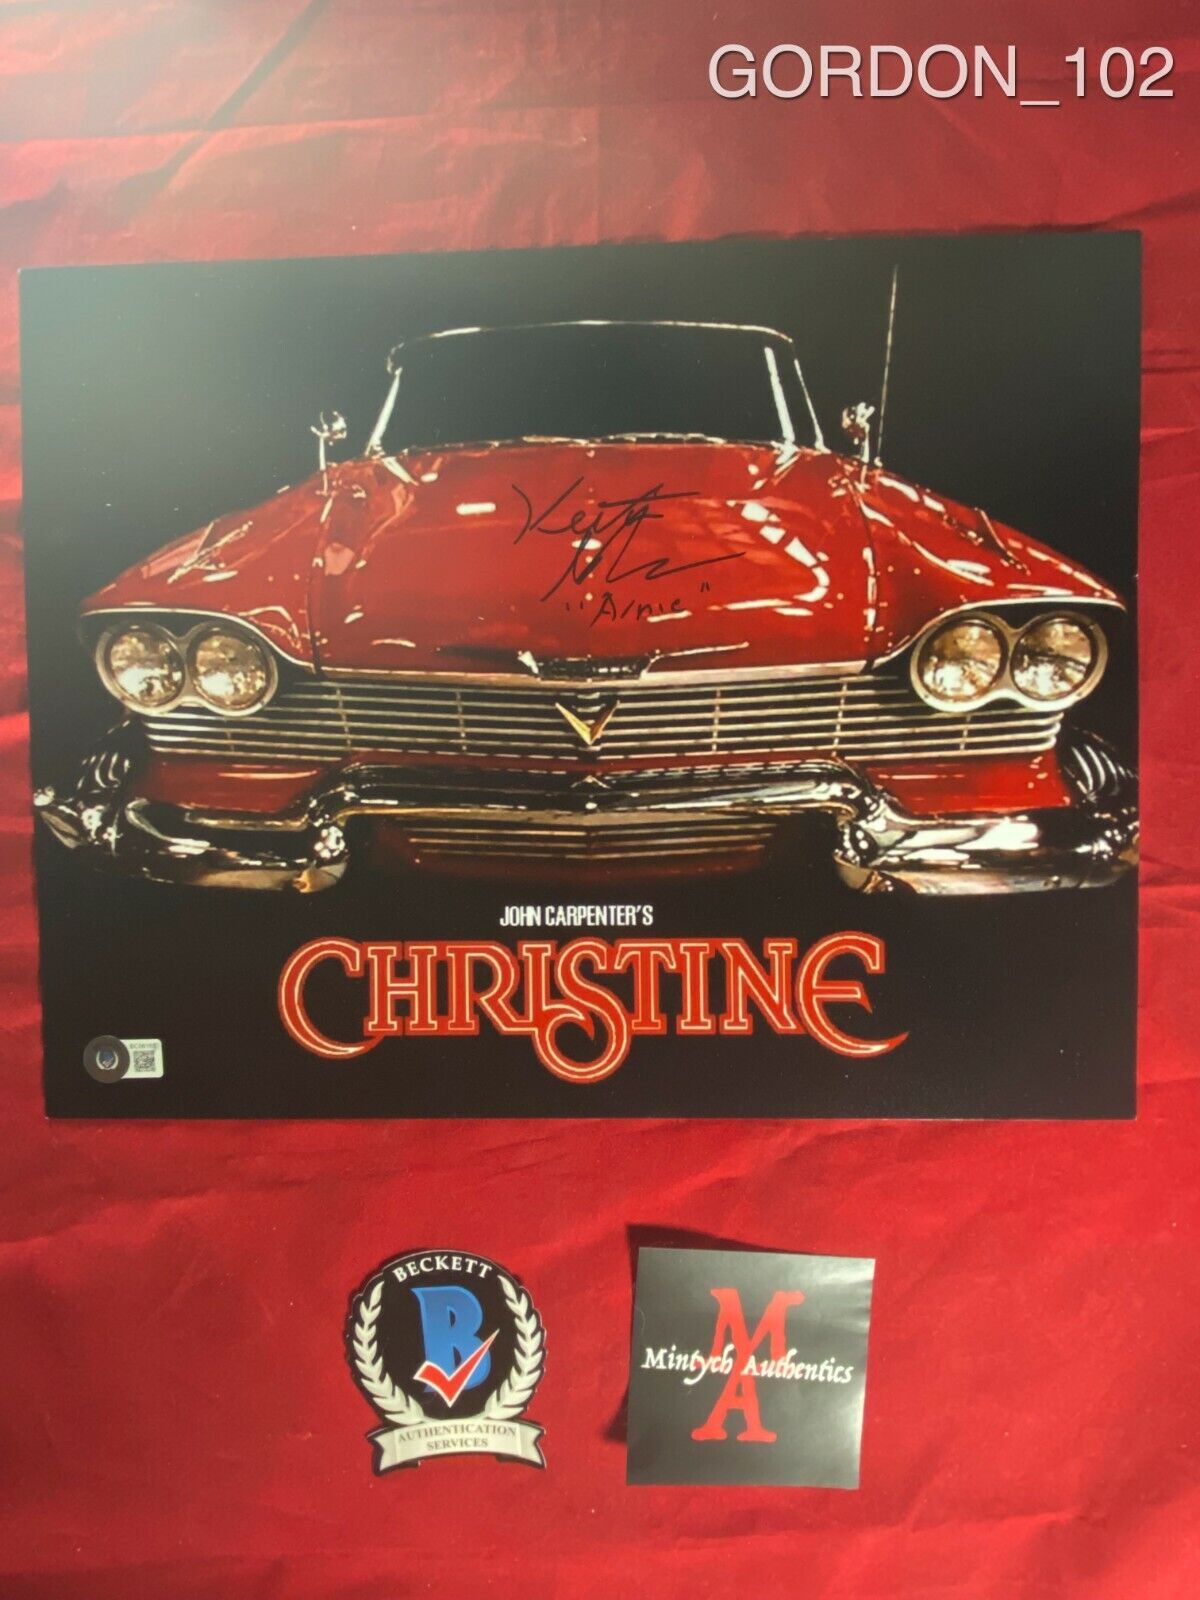 KEITH GORDON AUTOGRAPHED SIGNED 11x14 Photo Poster painting! CHRISTINE! BECKETT! STEPHEN KING!